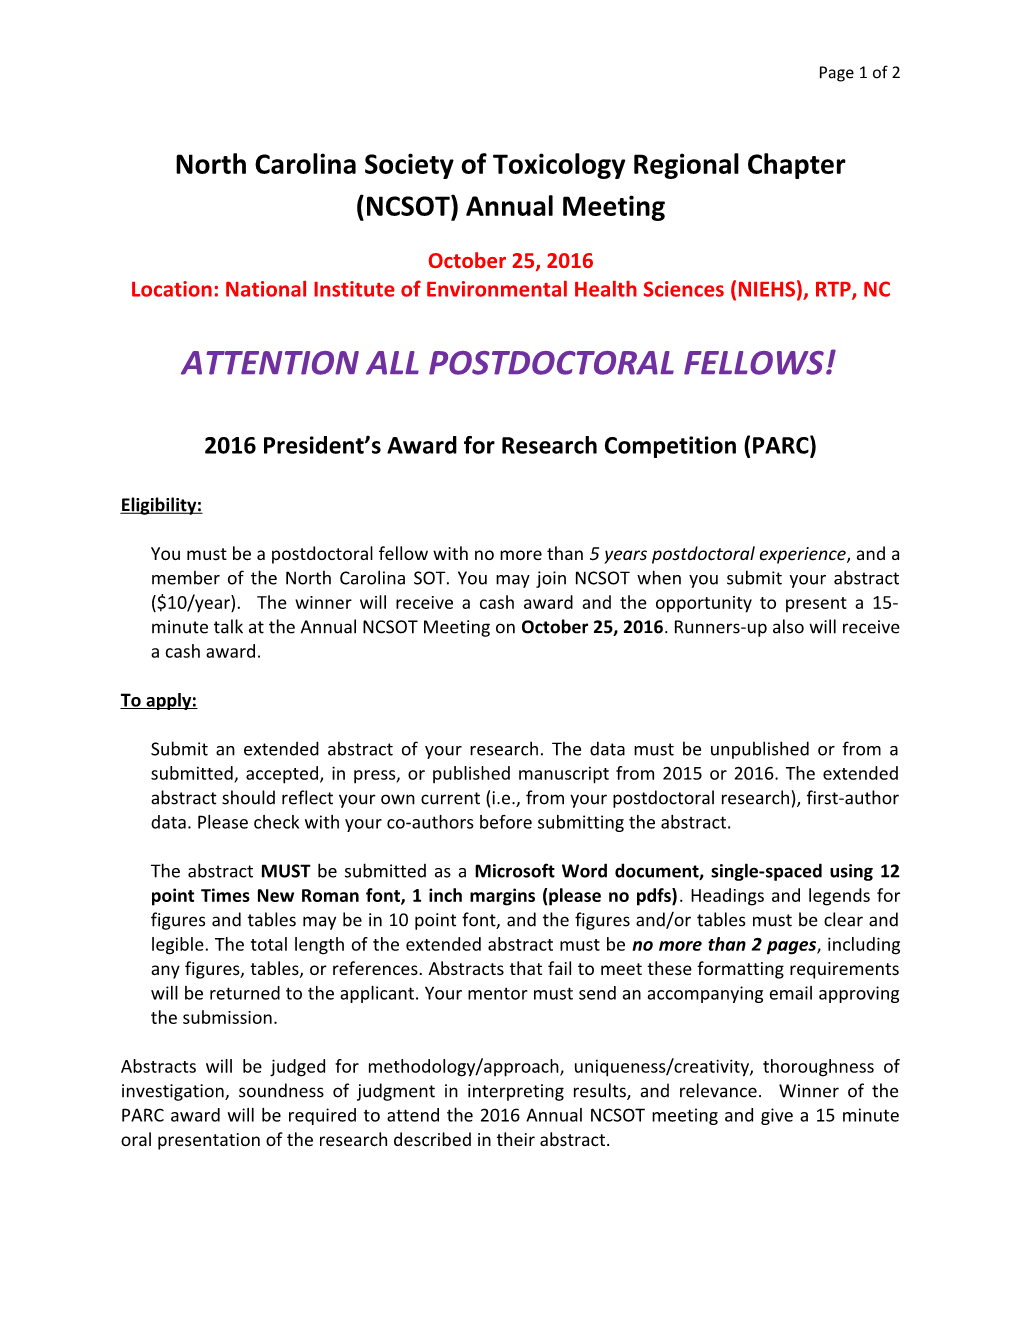 North Carolina Society of Toxicology Regional Chapter (NCSOT) Annual Meeting